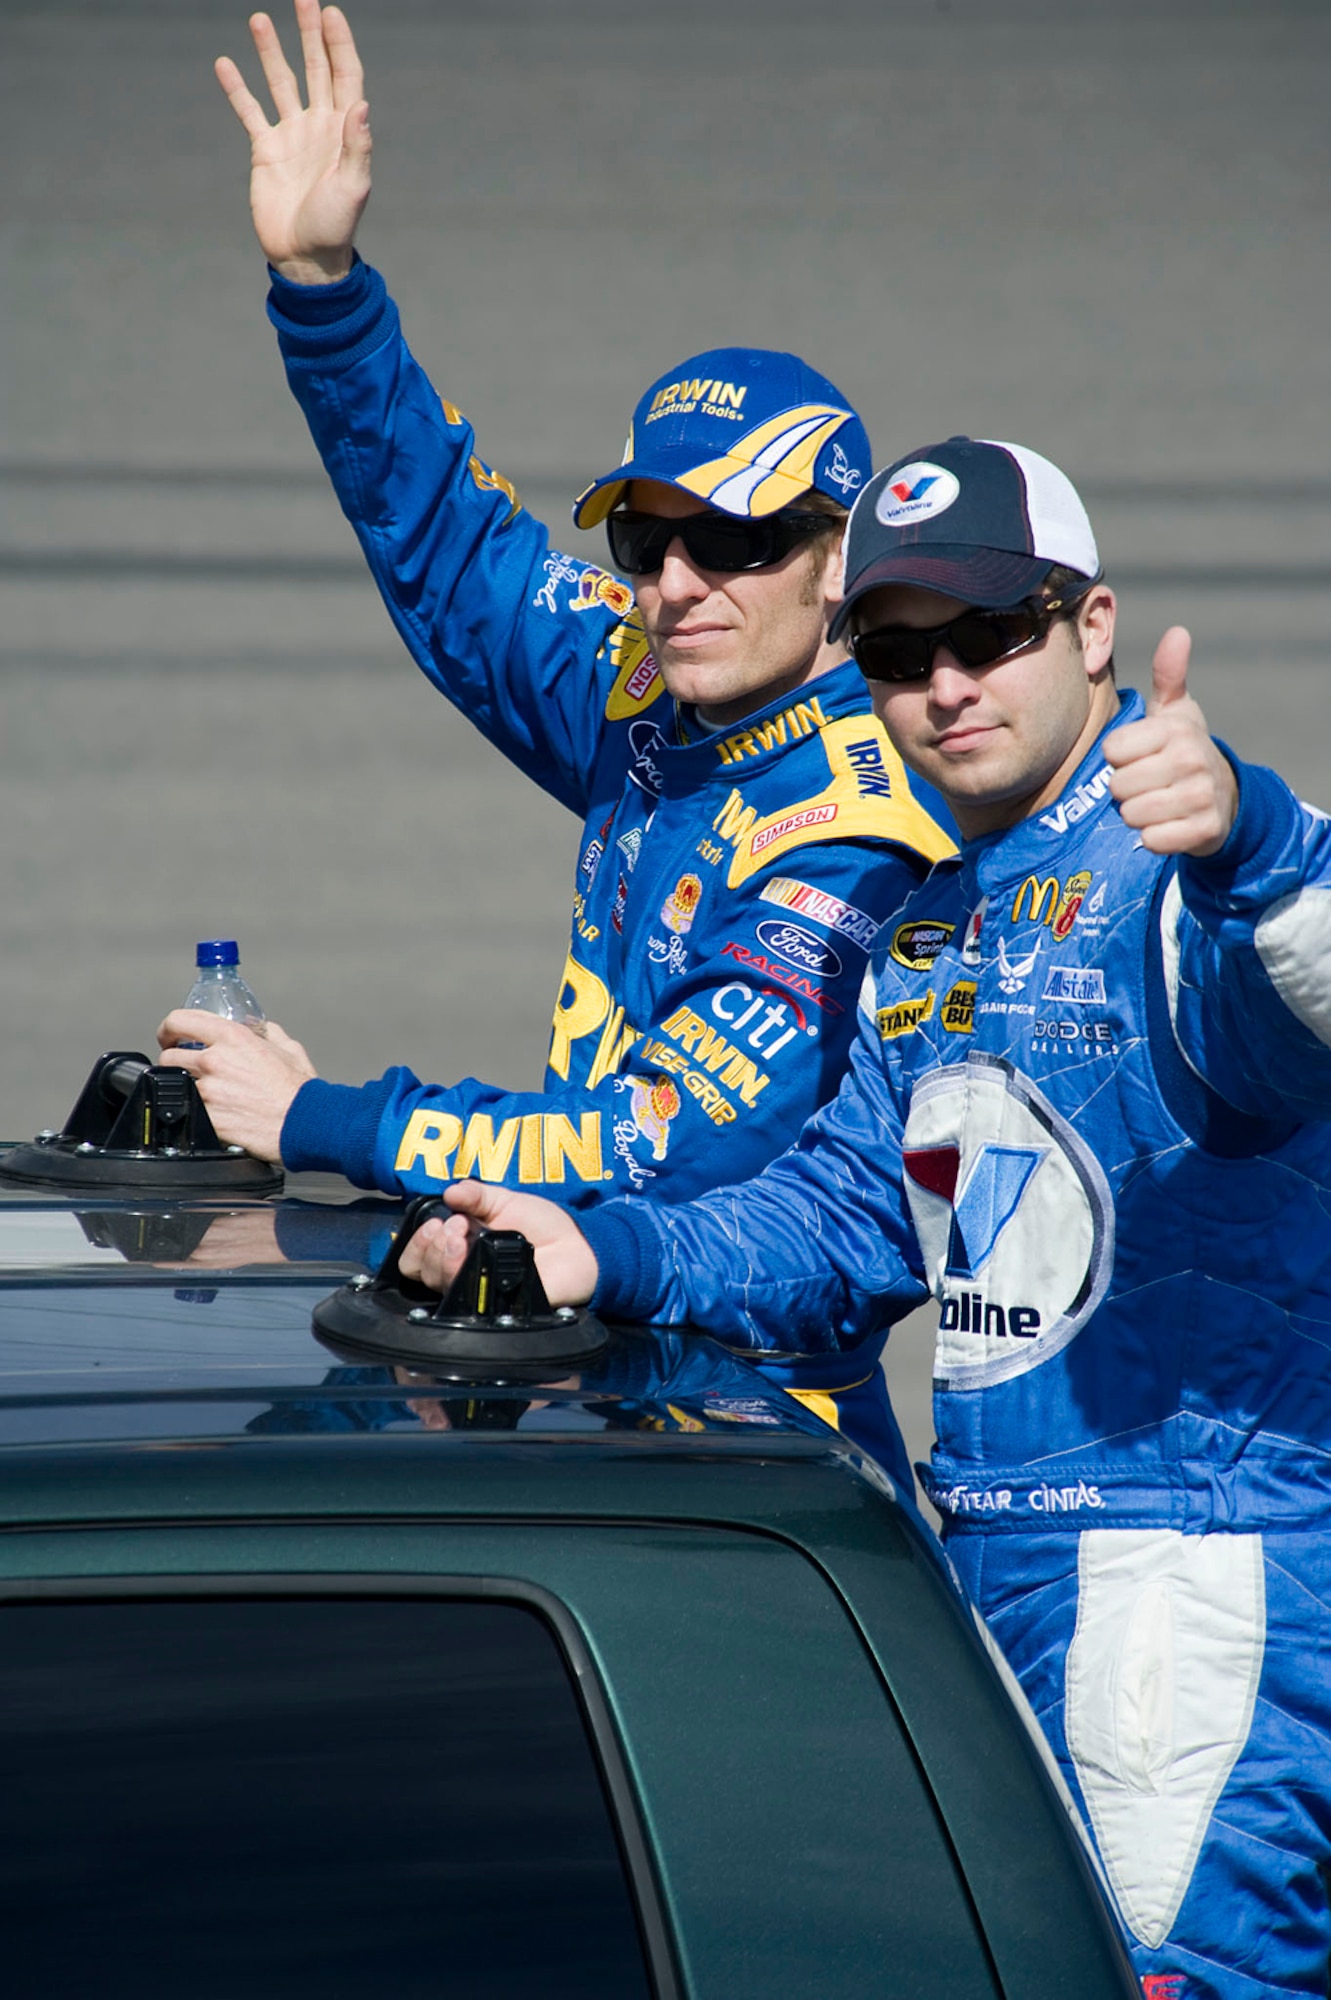 Sprint Cup drivers Reed Sorenson (front) and Jamie McMurray wave to the crowd during driver introductions for the Shelby 427 race March 1 at the Las Vegas Motor Speedway. Mr. Sorenson, driver of the No. 43 Air Force sponsored Dodge, finished the race in 34th place after spinning in turn two on lap 138.  (U.S. Air Force photo/Master Sgt. Jack Braden)